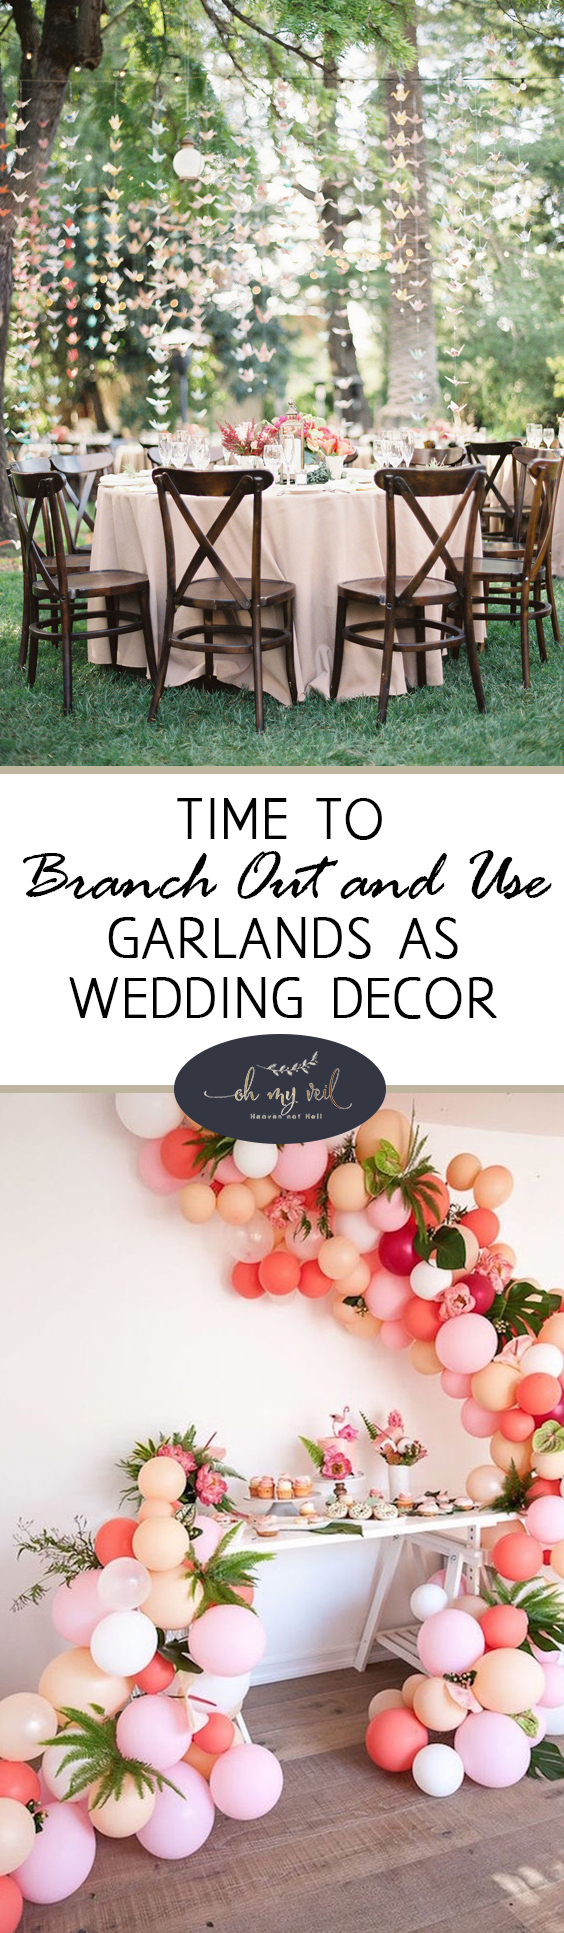 Time to Branch Out: Using Garlands as Wedding Decor| Wedding Decor, Wedding DIY, DIY Wedding Decor, Wedding Centerpieces, DIY Wedding Centerpieces, DIY Wedding, DIY Wedding Ideas, DIY Wedding Decor, Popular Pin, Wedding Inspiration